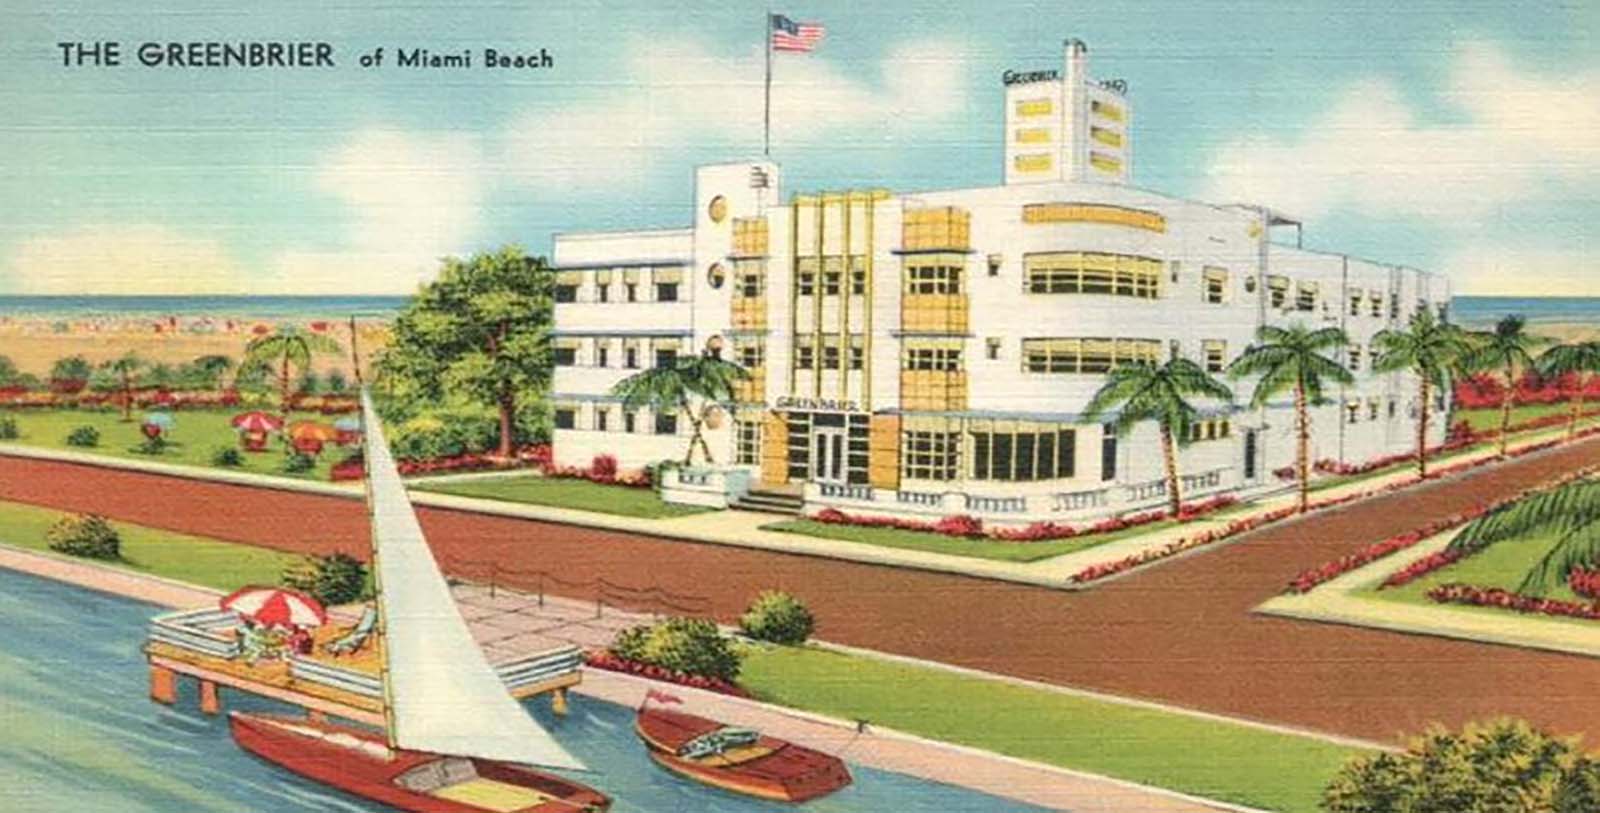 Discover Hotel Trouvail Miami Beach’s provenance as a distinct historic hotel in the Collins Waterfront Architectural District (originally named The Greenbrier).